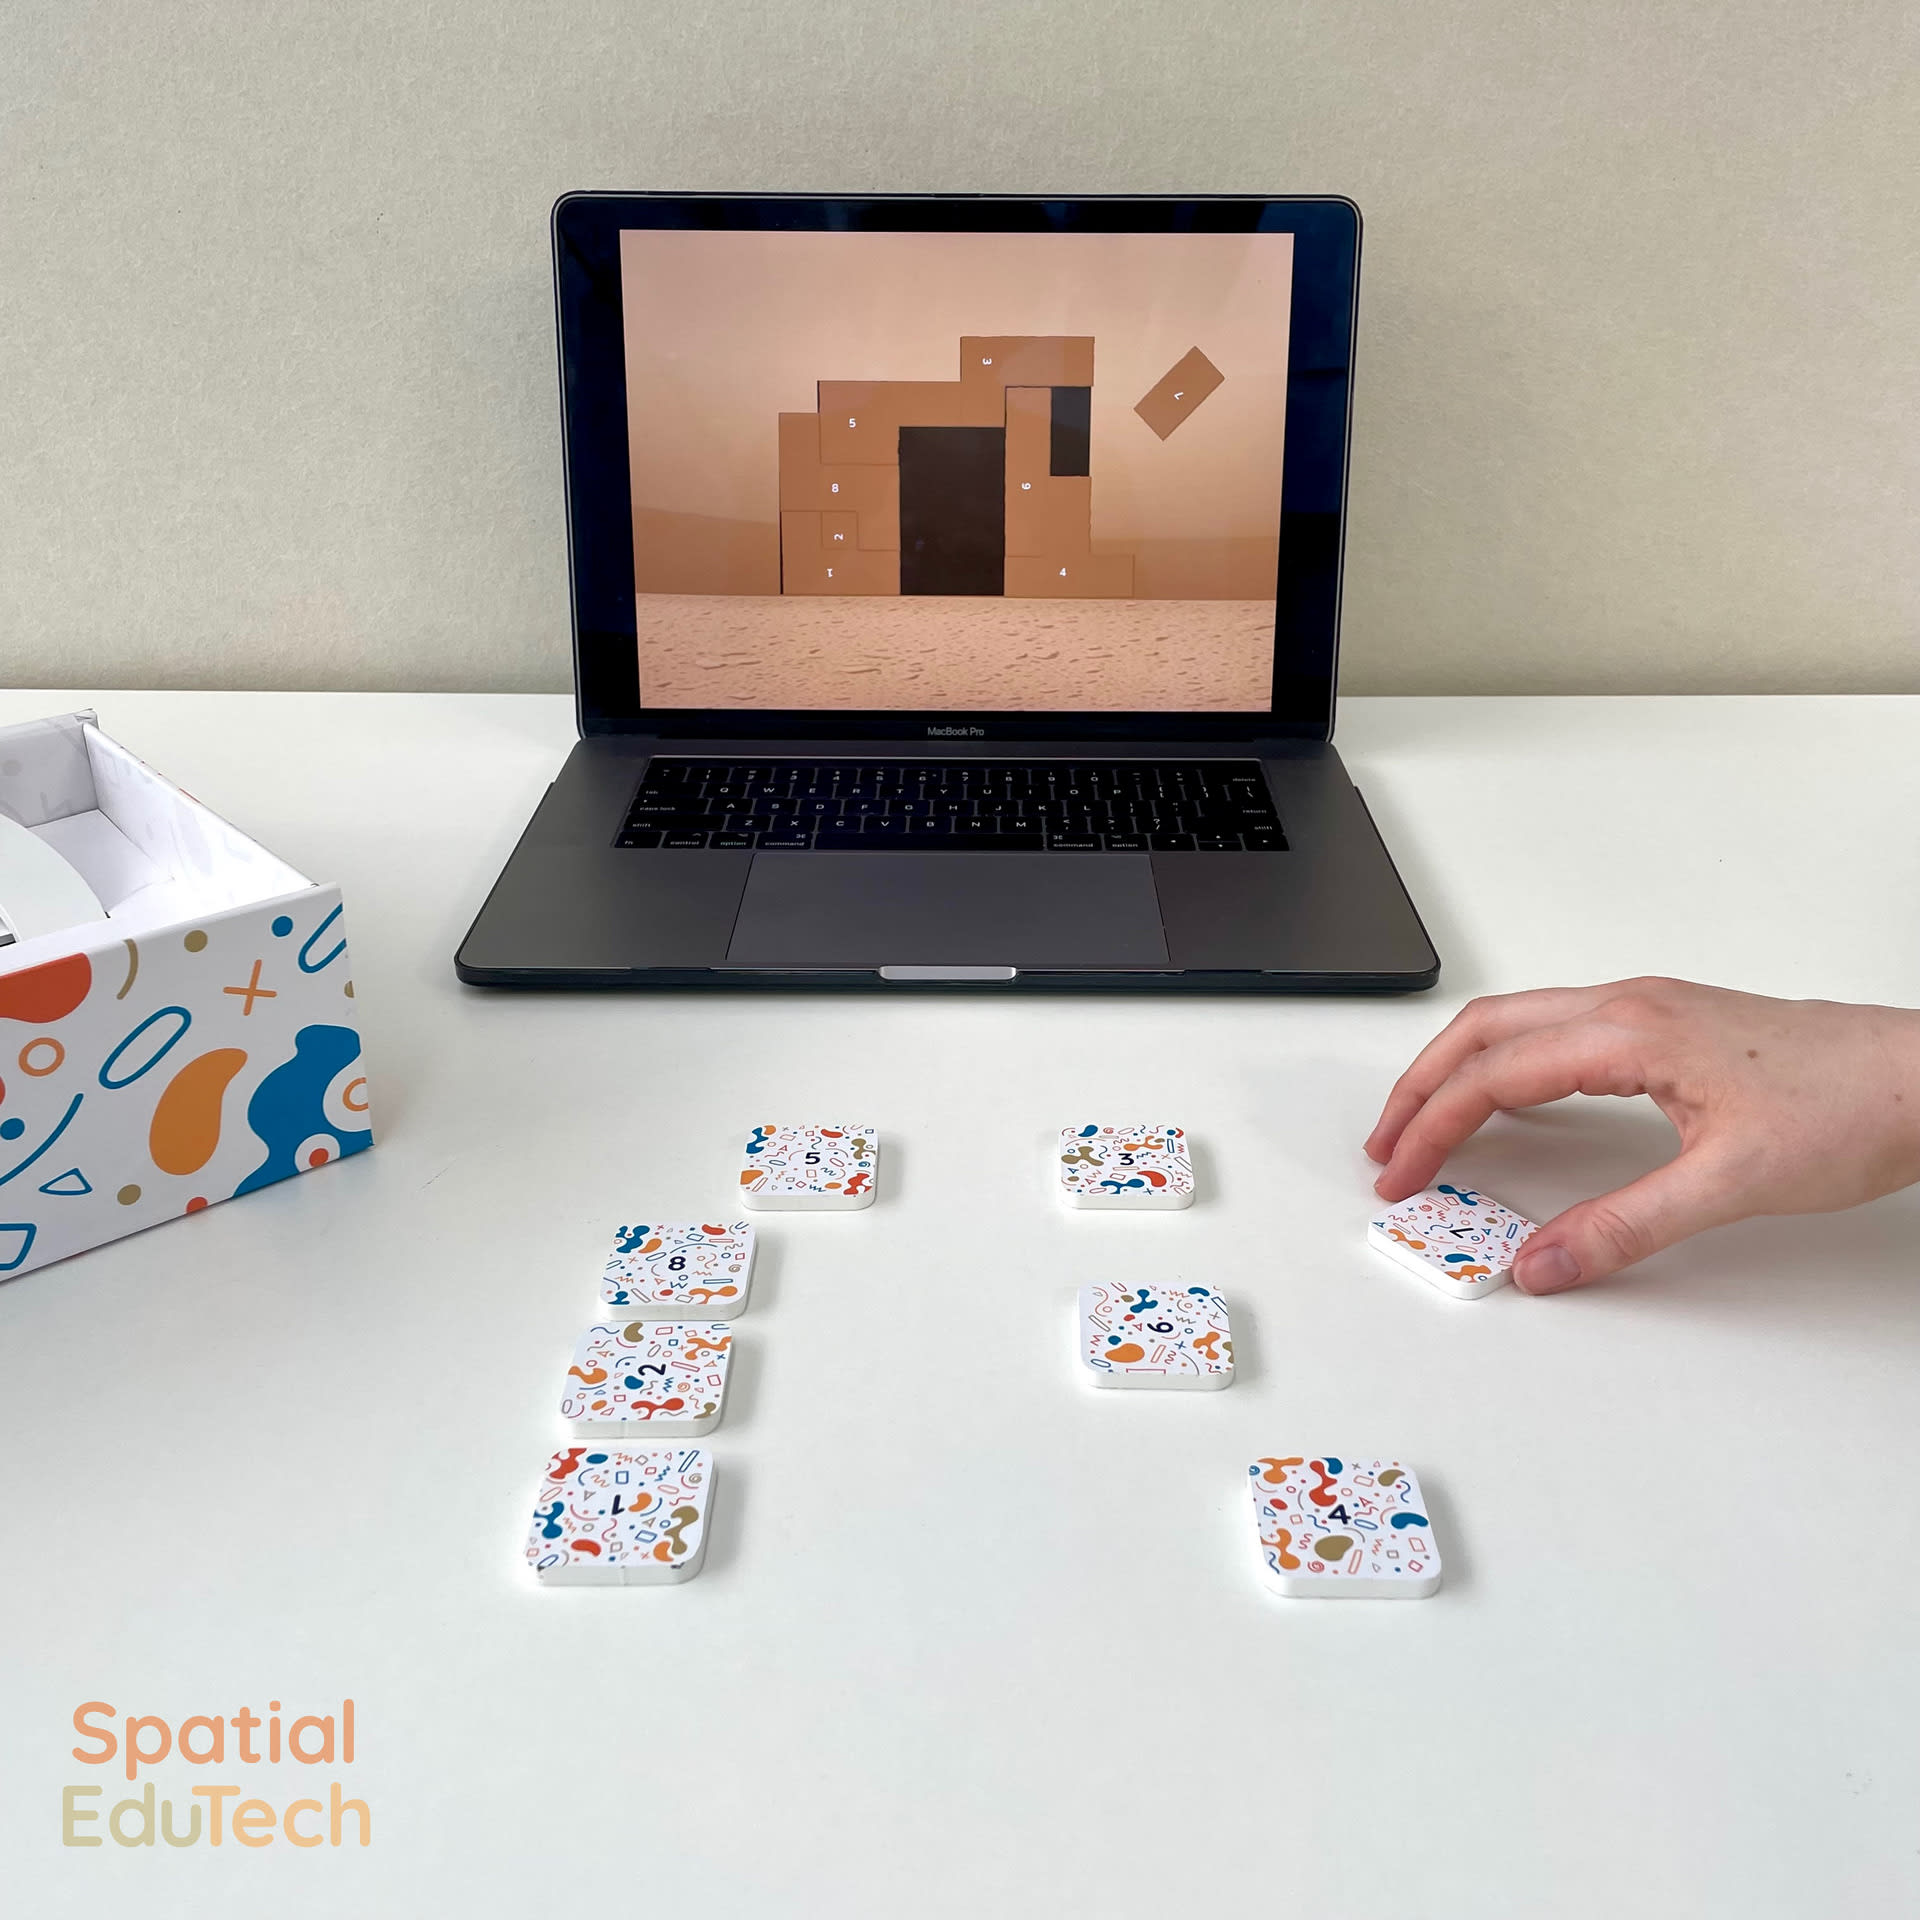 A tiling puzzle on a laptop with physical game pieces in front, with a hand positioning a piece to solve the digital puzzle.